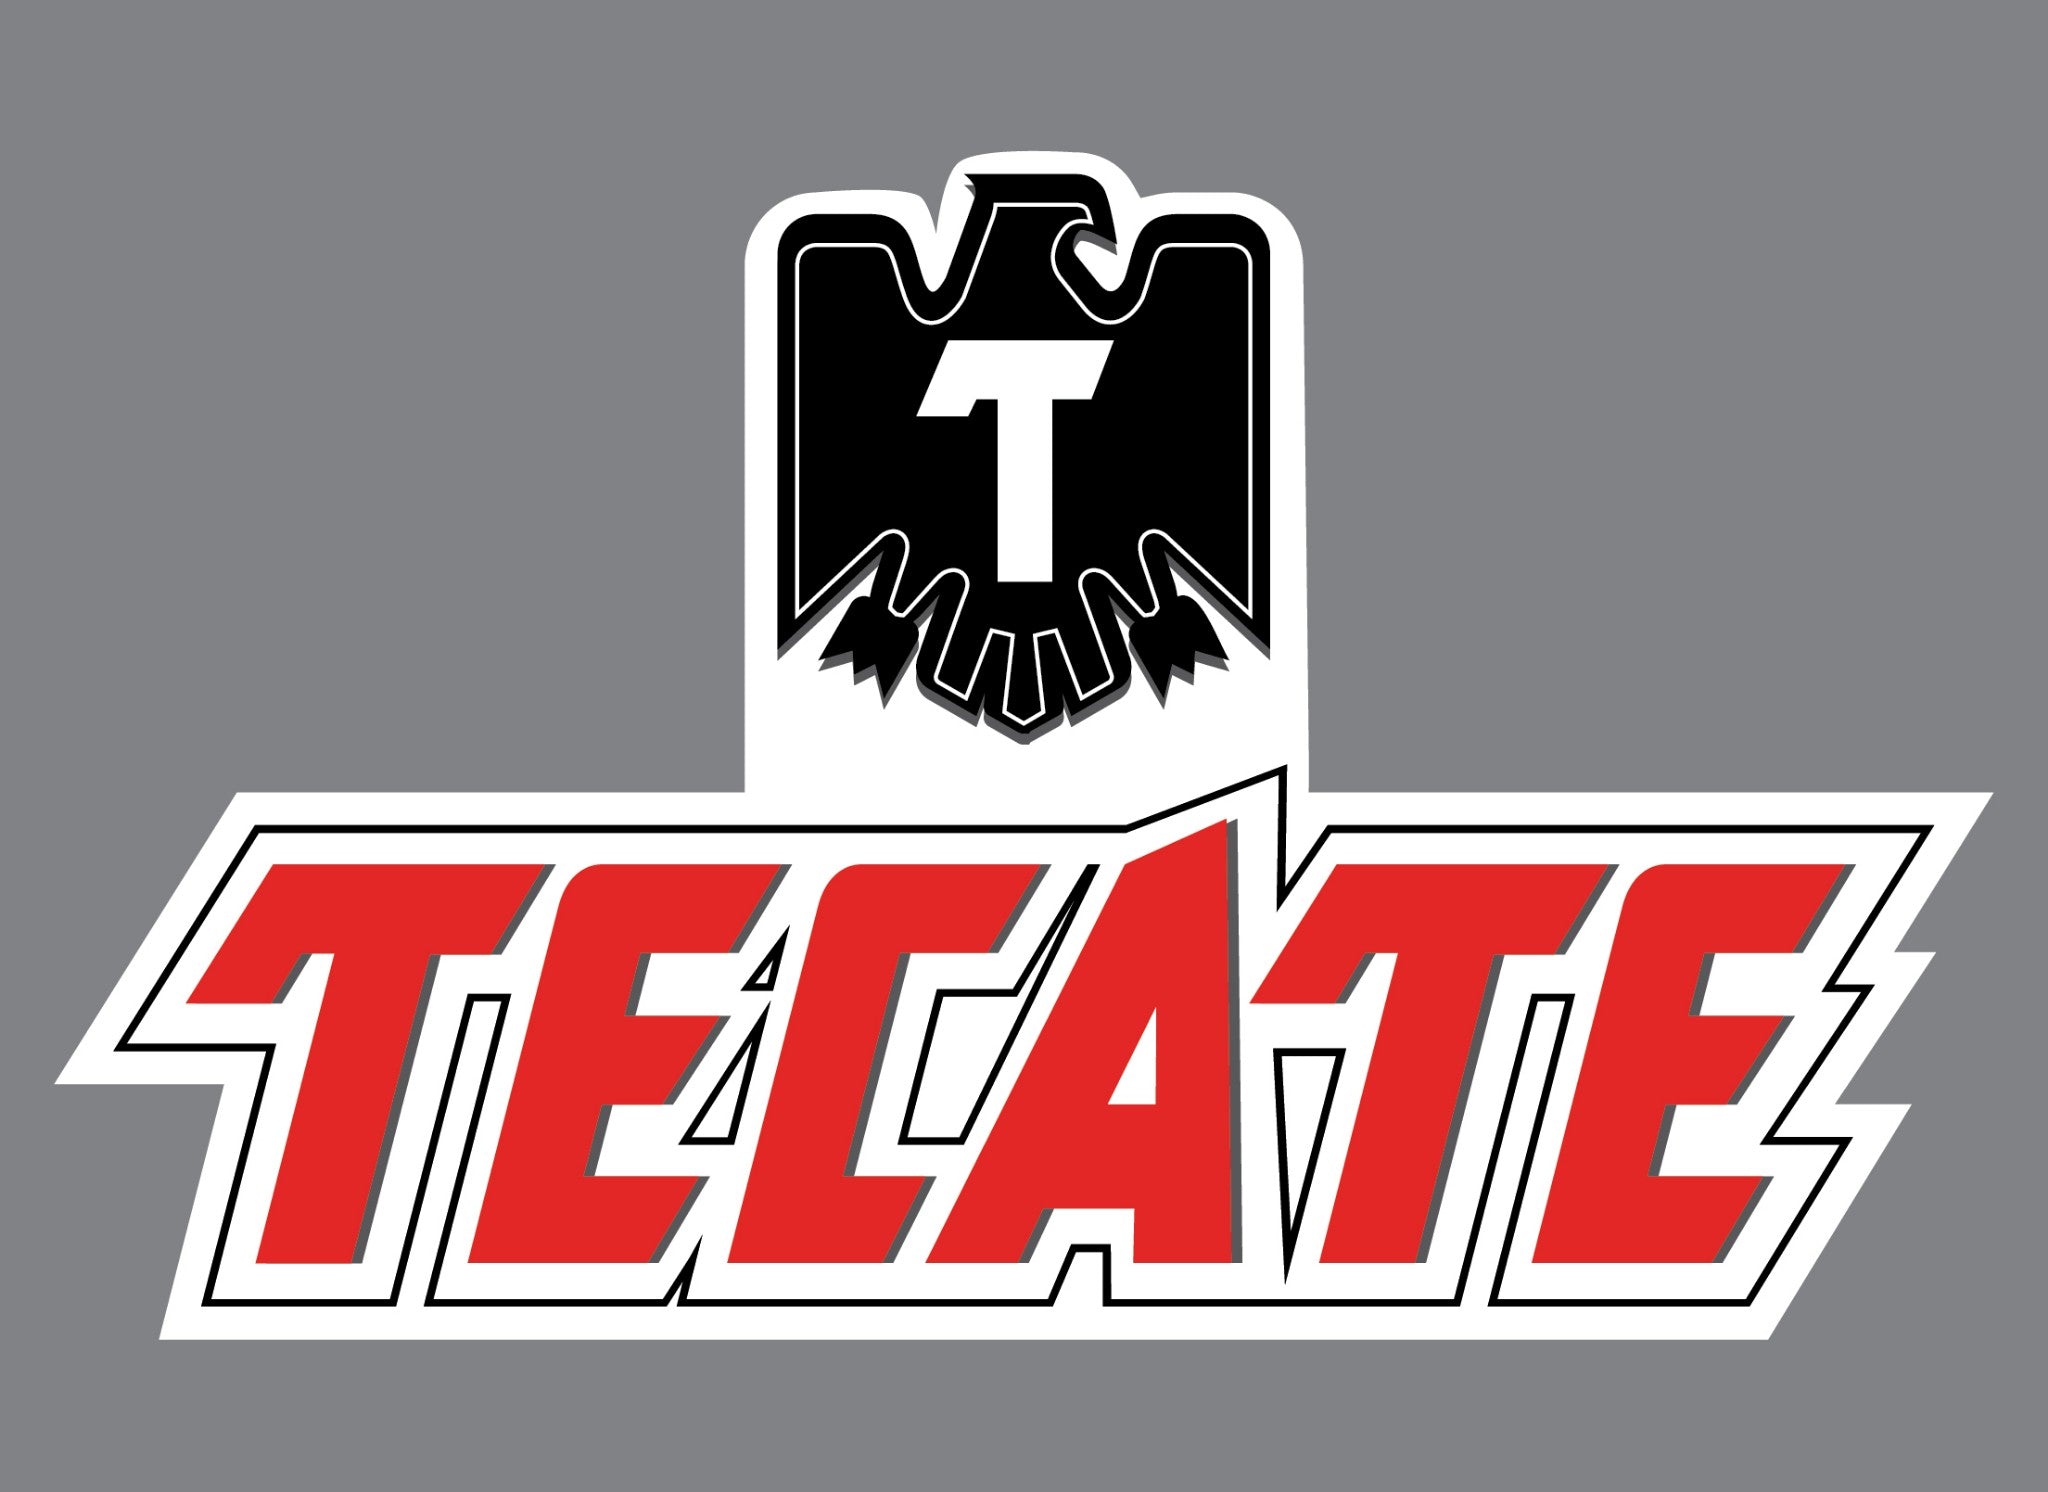 Tecate Beer Logo Decal Sticker Choose Size 3M